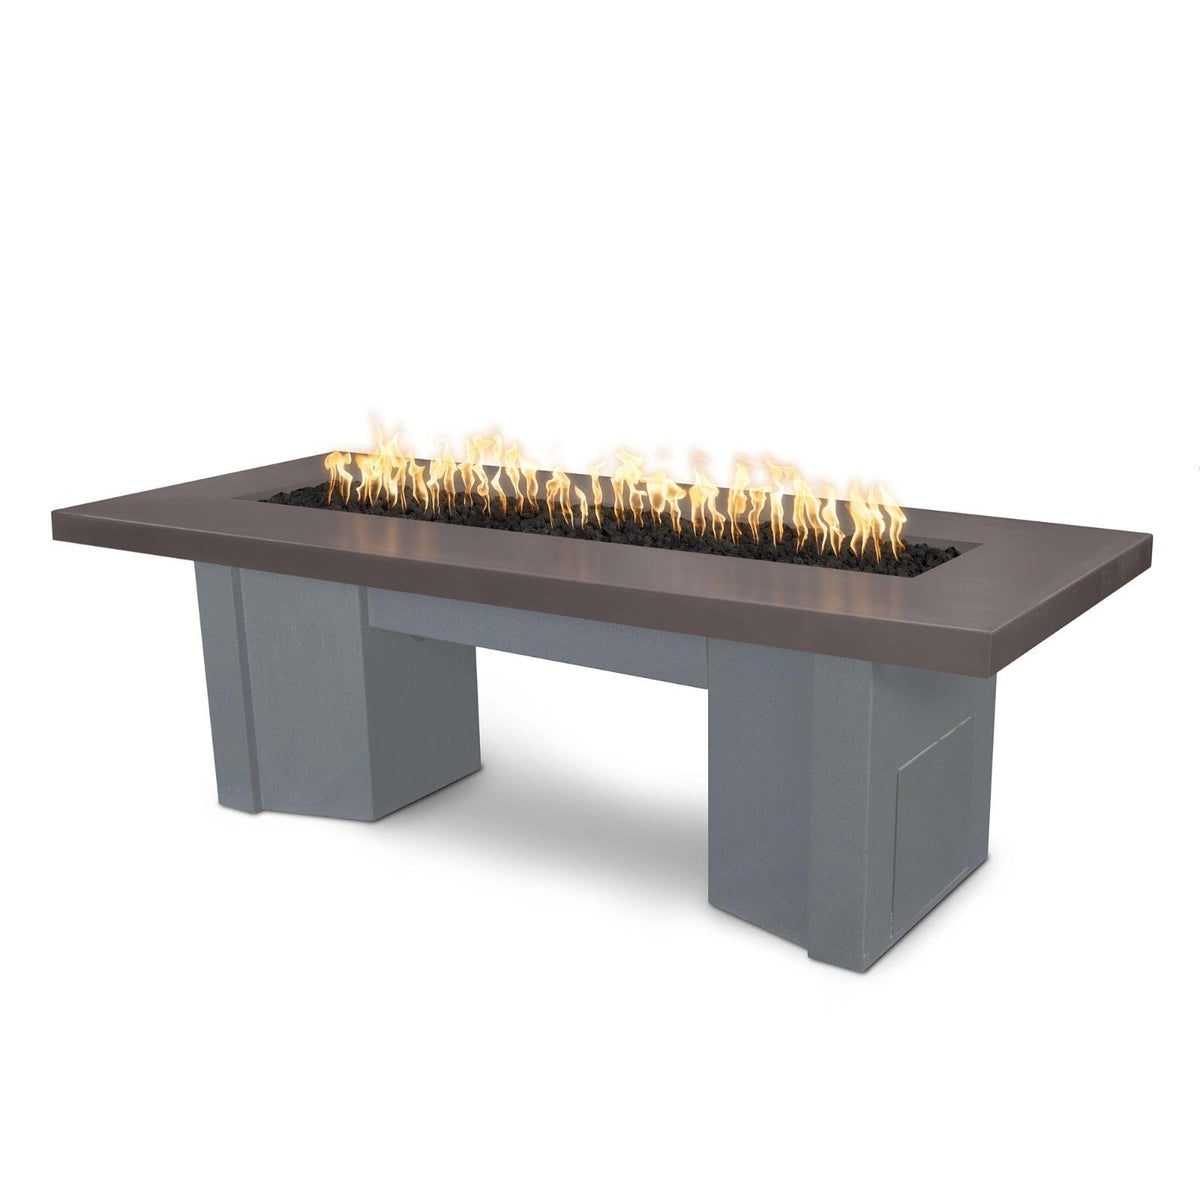 The Outdoor Plus Fire Features Chestnut (-CST) / Gray Powder Coated Steel (-GRY) The Outdoor Plus 78&quot; Alameda Fire Table Smooth Concrete in Natural Gas - Match Lit with Flame Sense System / OPT-ALMGFRC78FSML-NG